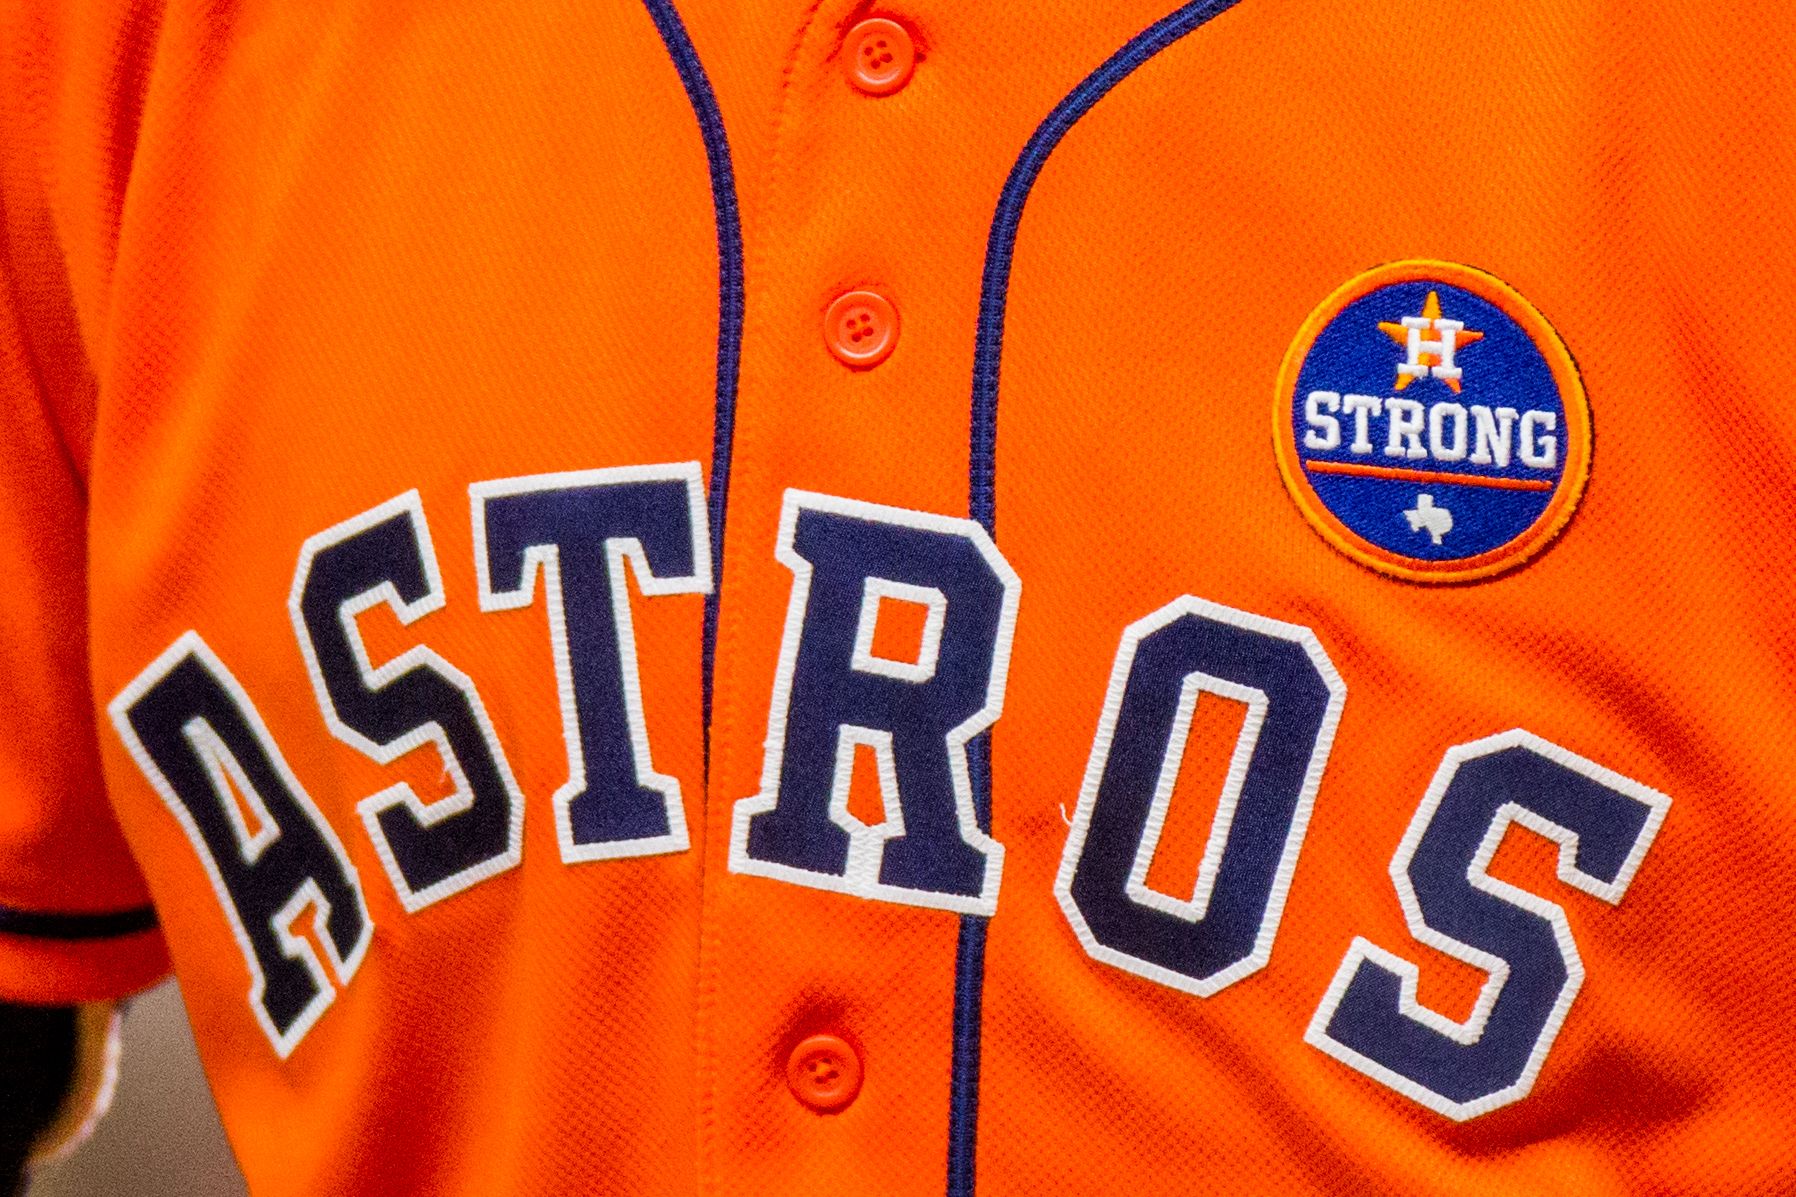 Little League teams in several states are dropping the Houston Astros name  in the wake of its cheating scandal